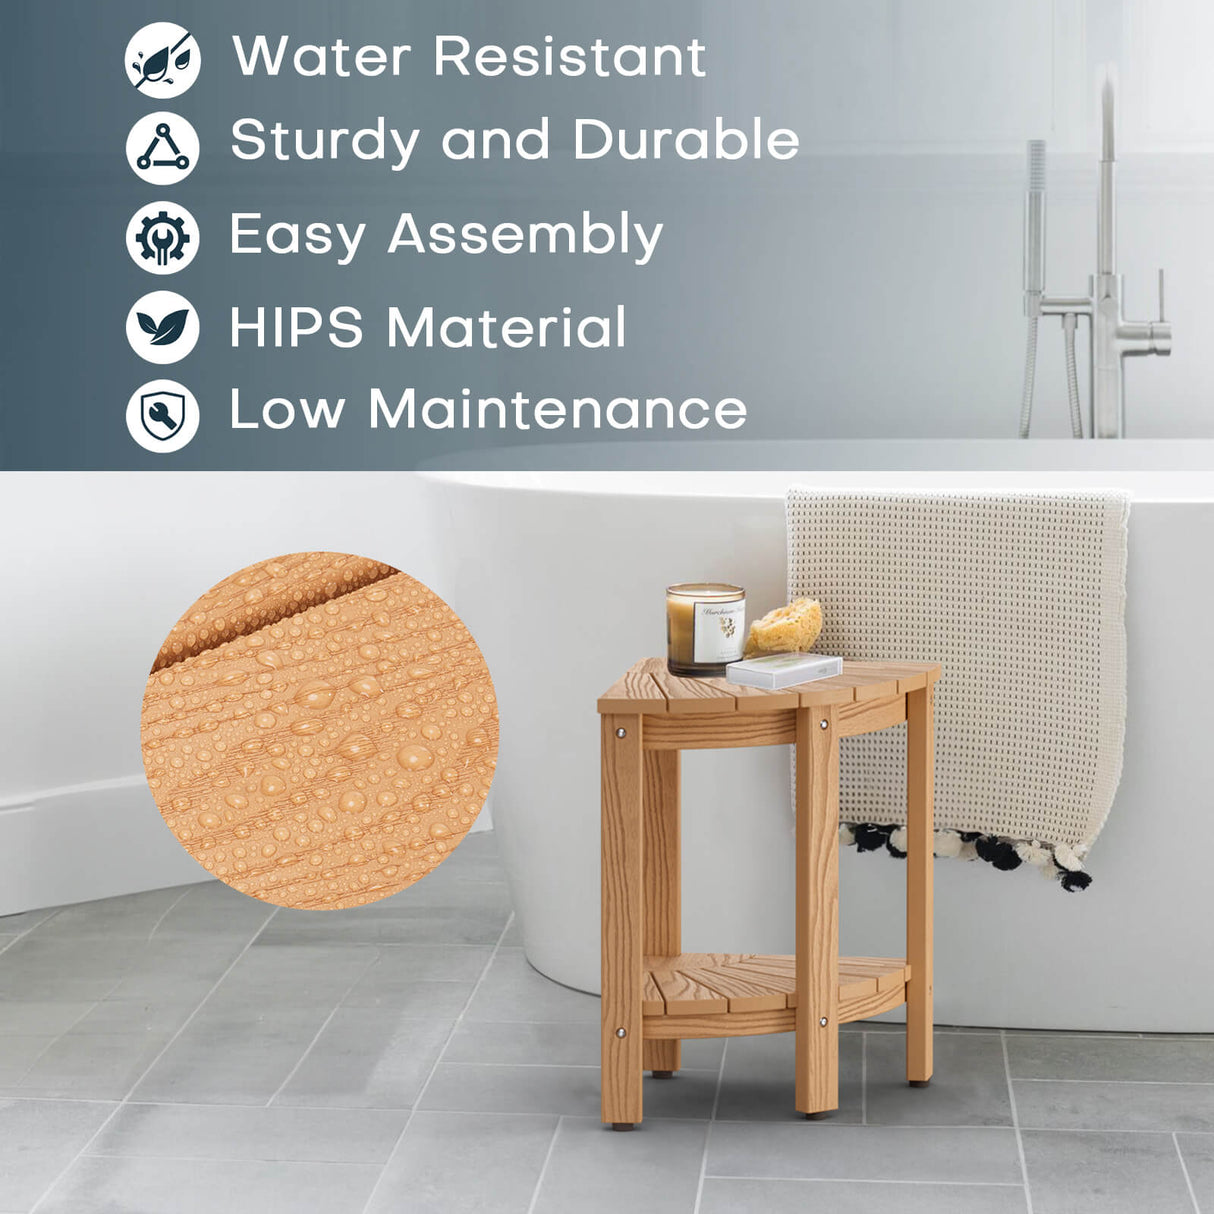 Upstreman 12" Corner Shower Bench Shower Stool for Inside Shower Seat with Shelf Foot Rest for Shaving Legs Water Resistance No-Maintenance Wooden-Like for Bathroom Spa Small Spaces (Teak Color)